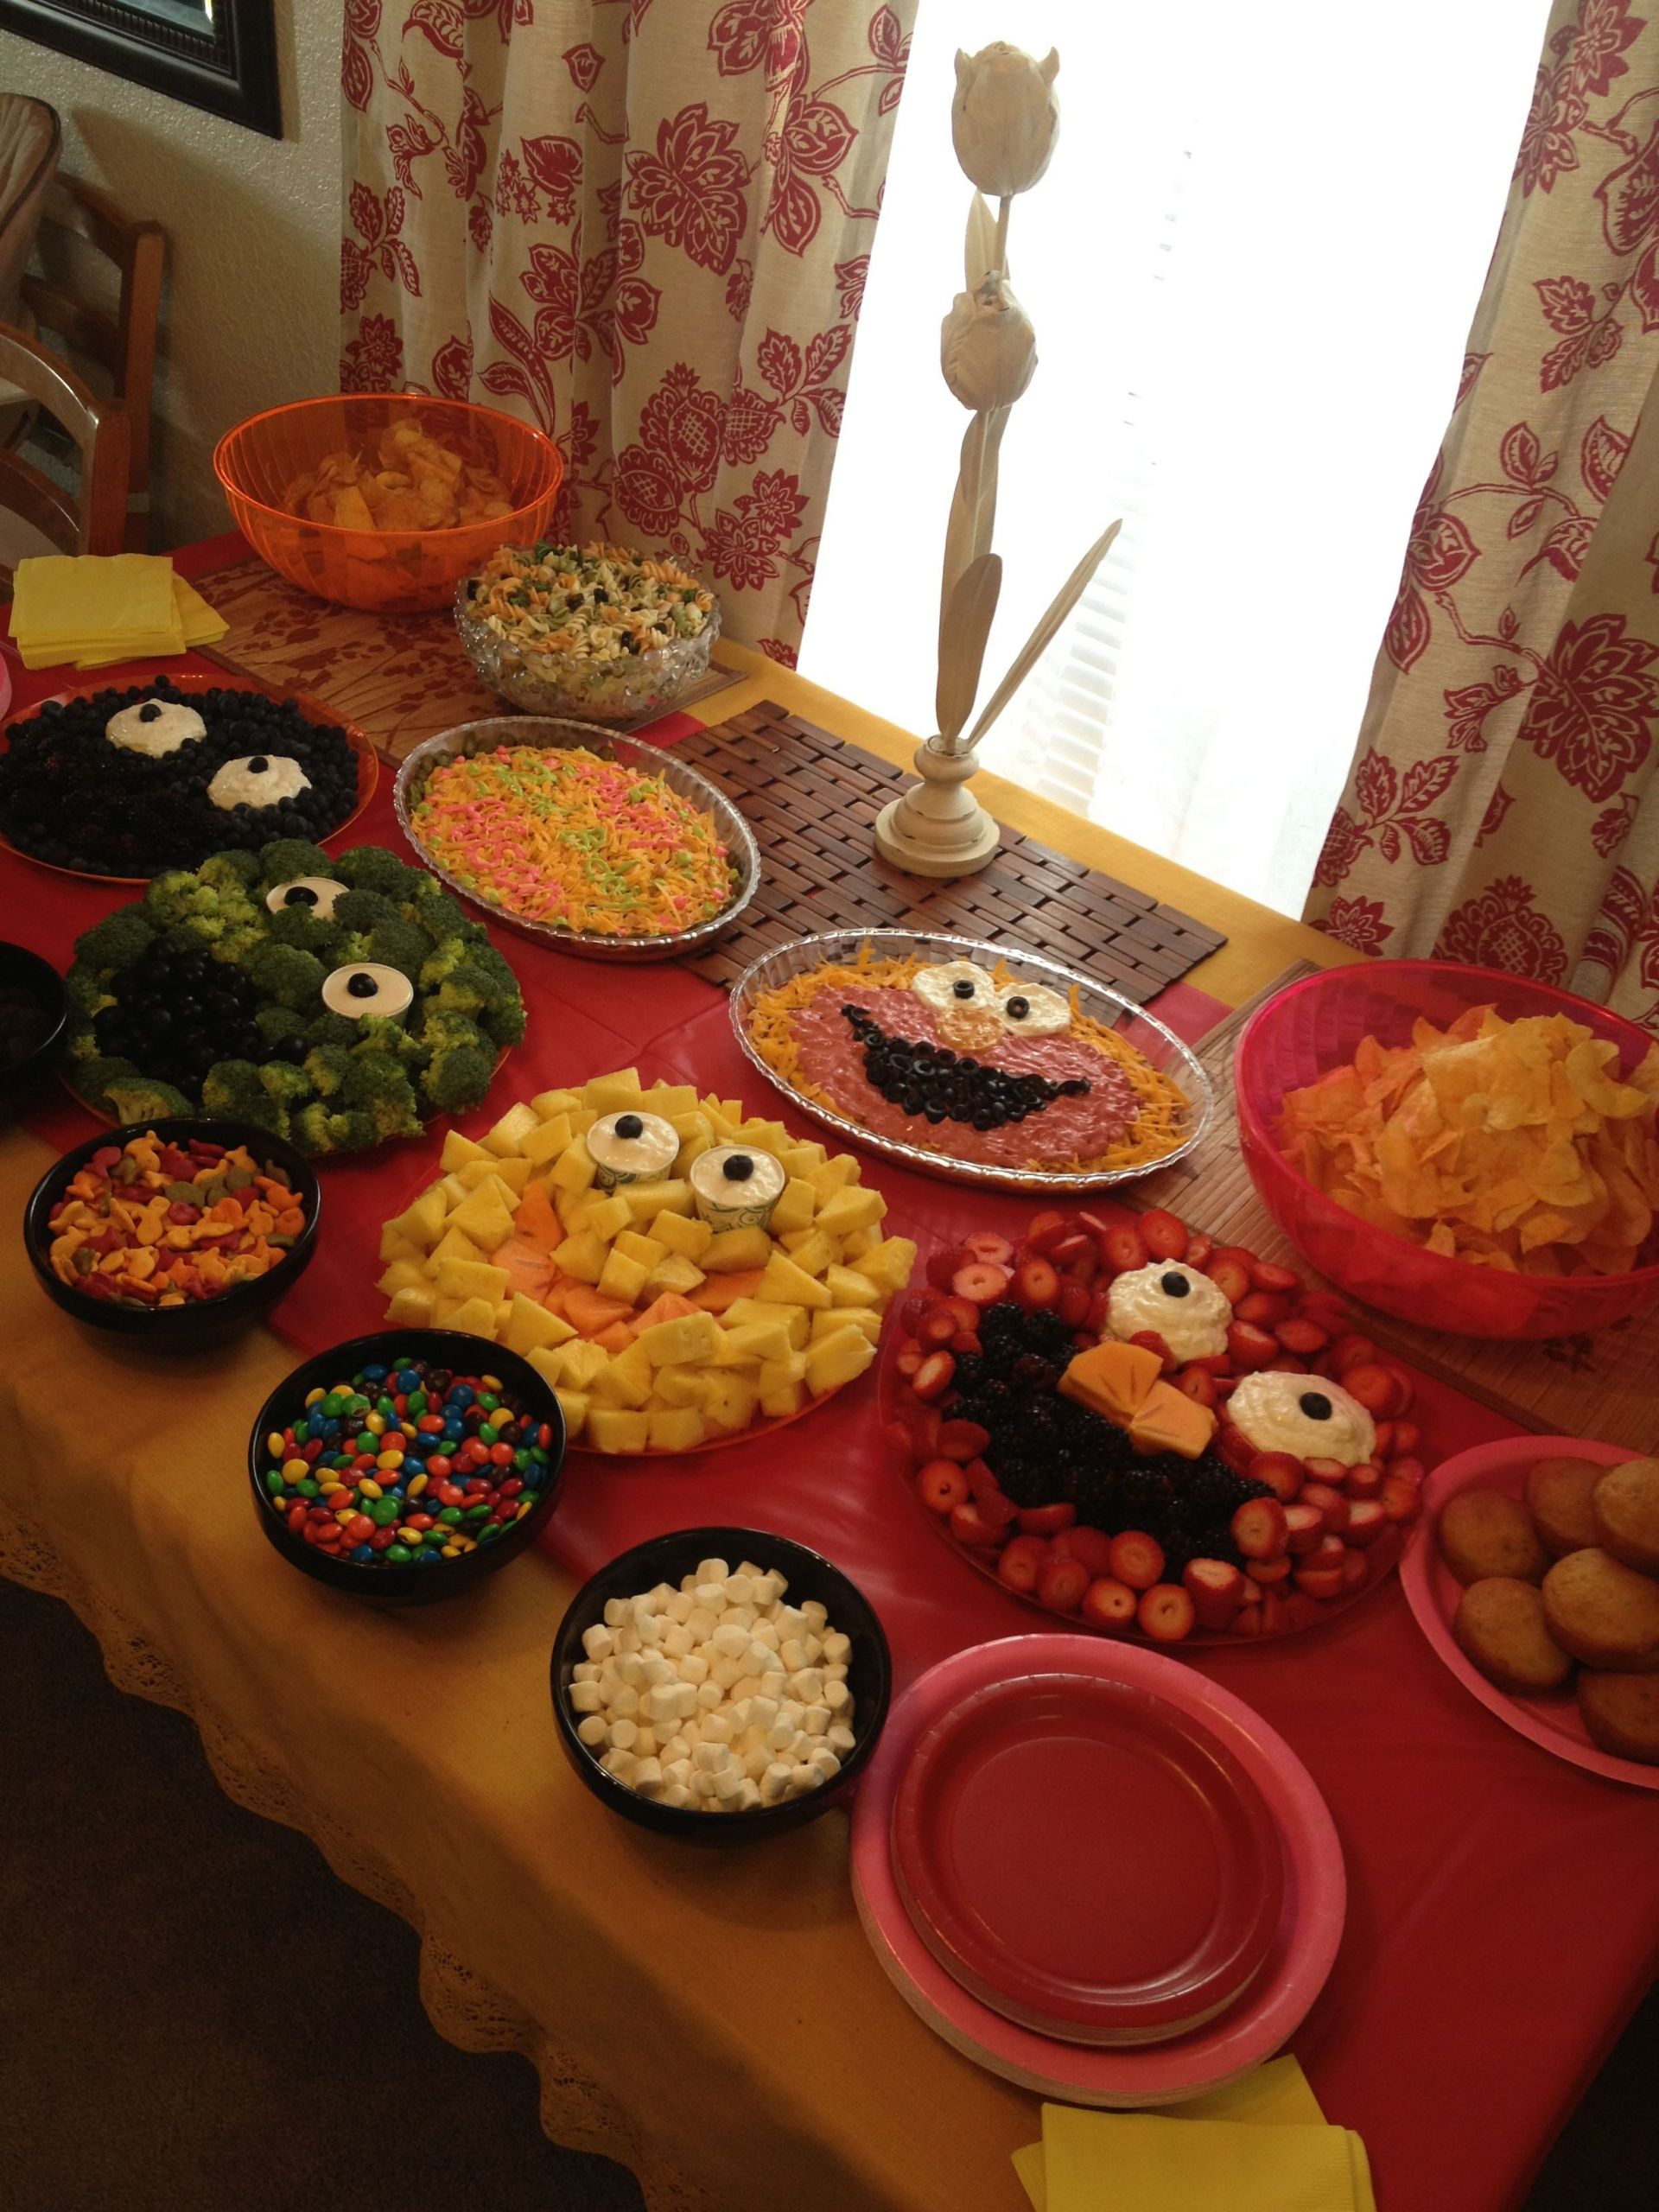 Food Ideas For A 2 Year Old Birthday Party
 Elmo themed 2 year old birthday party